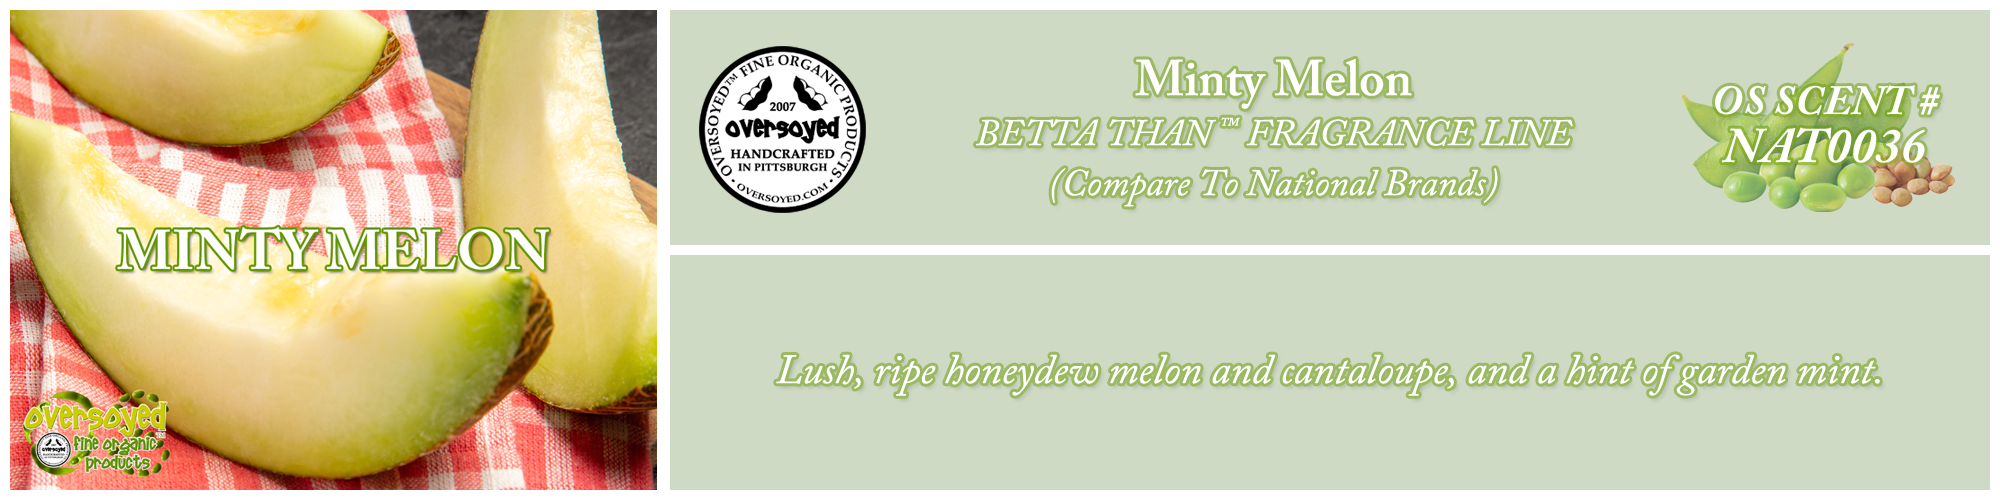 Minty Melon Handcrafted Products Collection